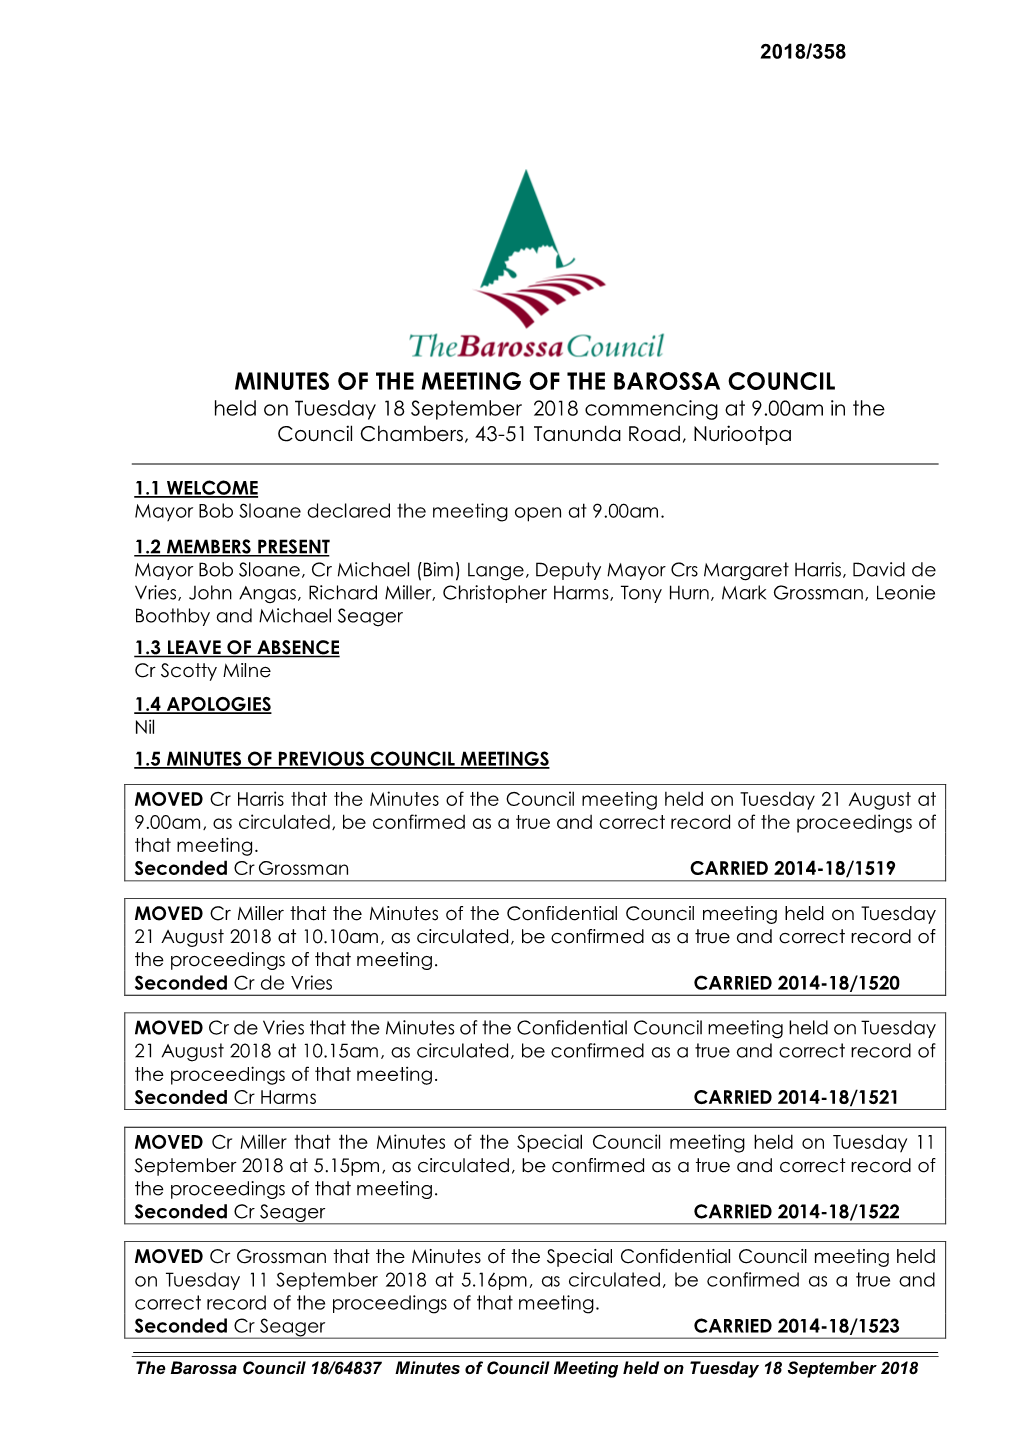 MINUTES of the MEETING of the BAROSSA COUNCIL Held on Tuesday 18 September 2018 Commencing at 9.00Am in the Council Chambers, 43-51 Tanunda Road, Nuriootpa